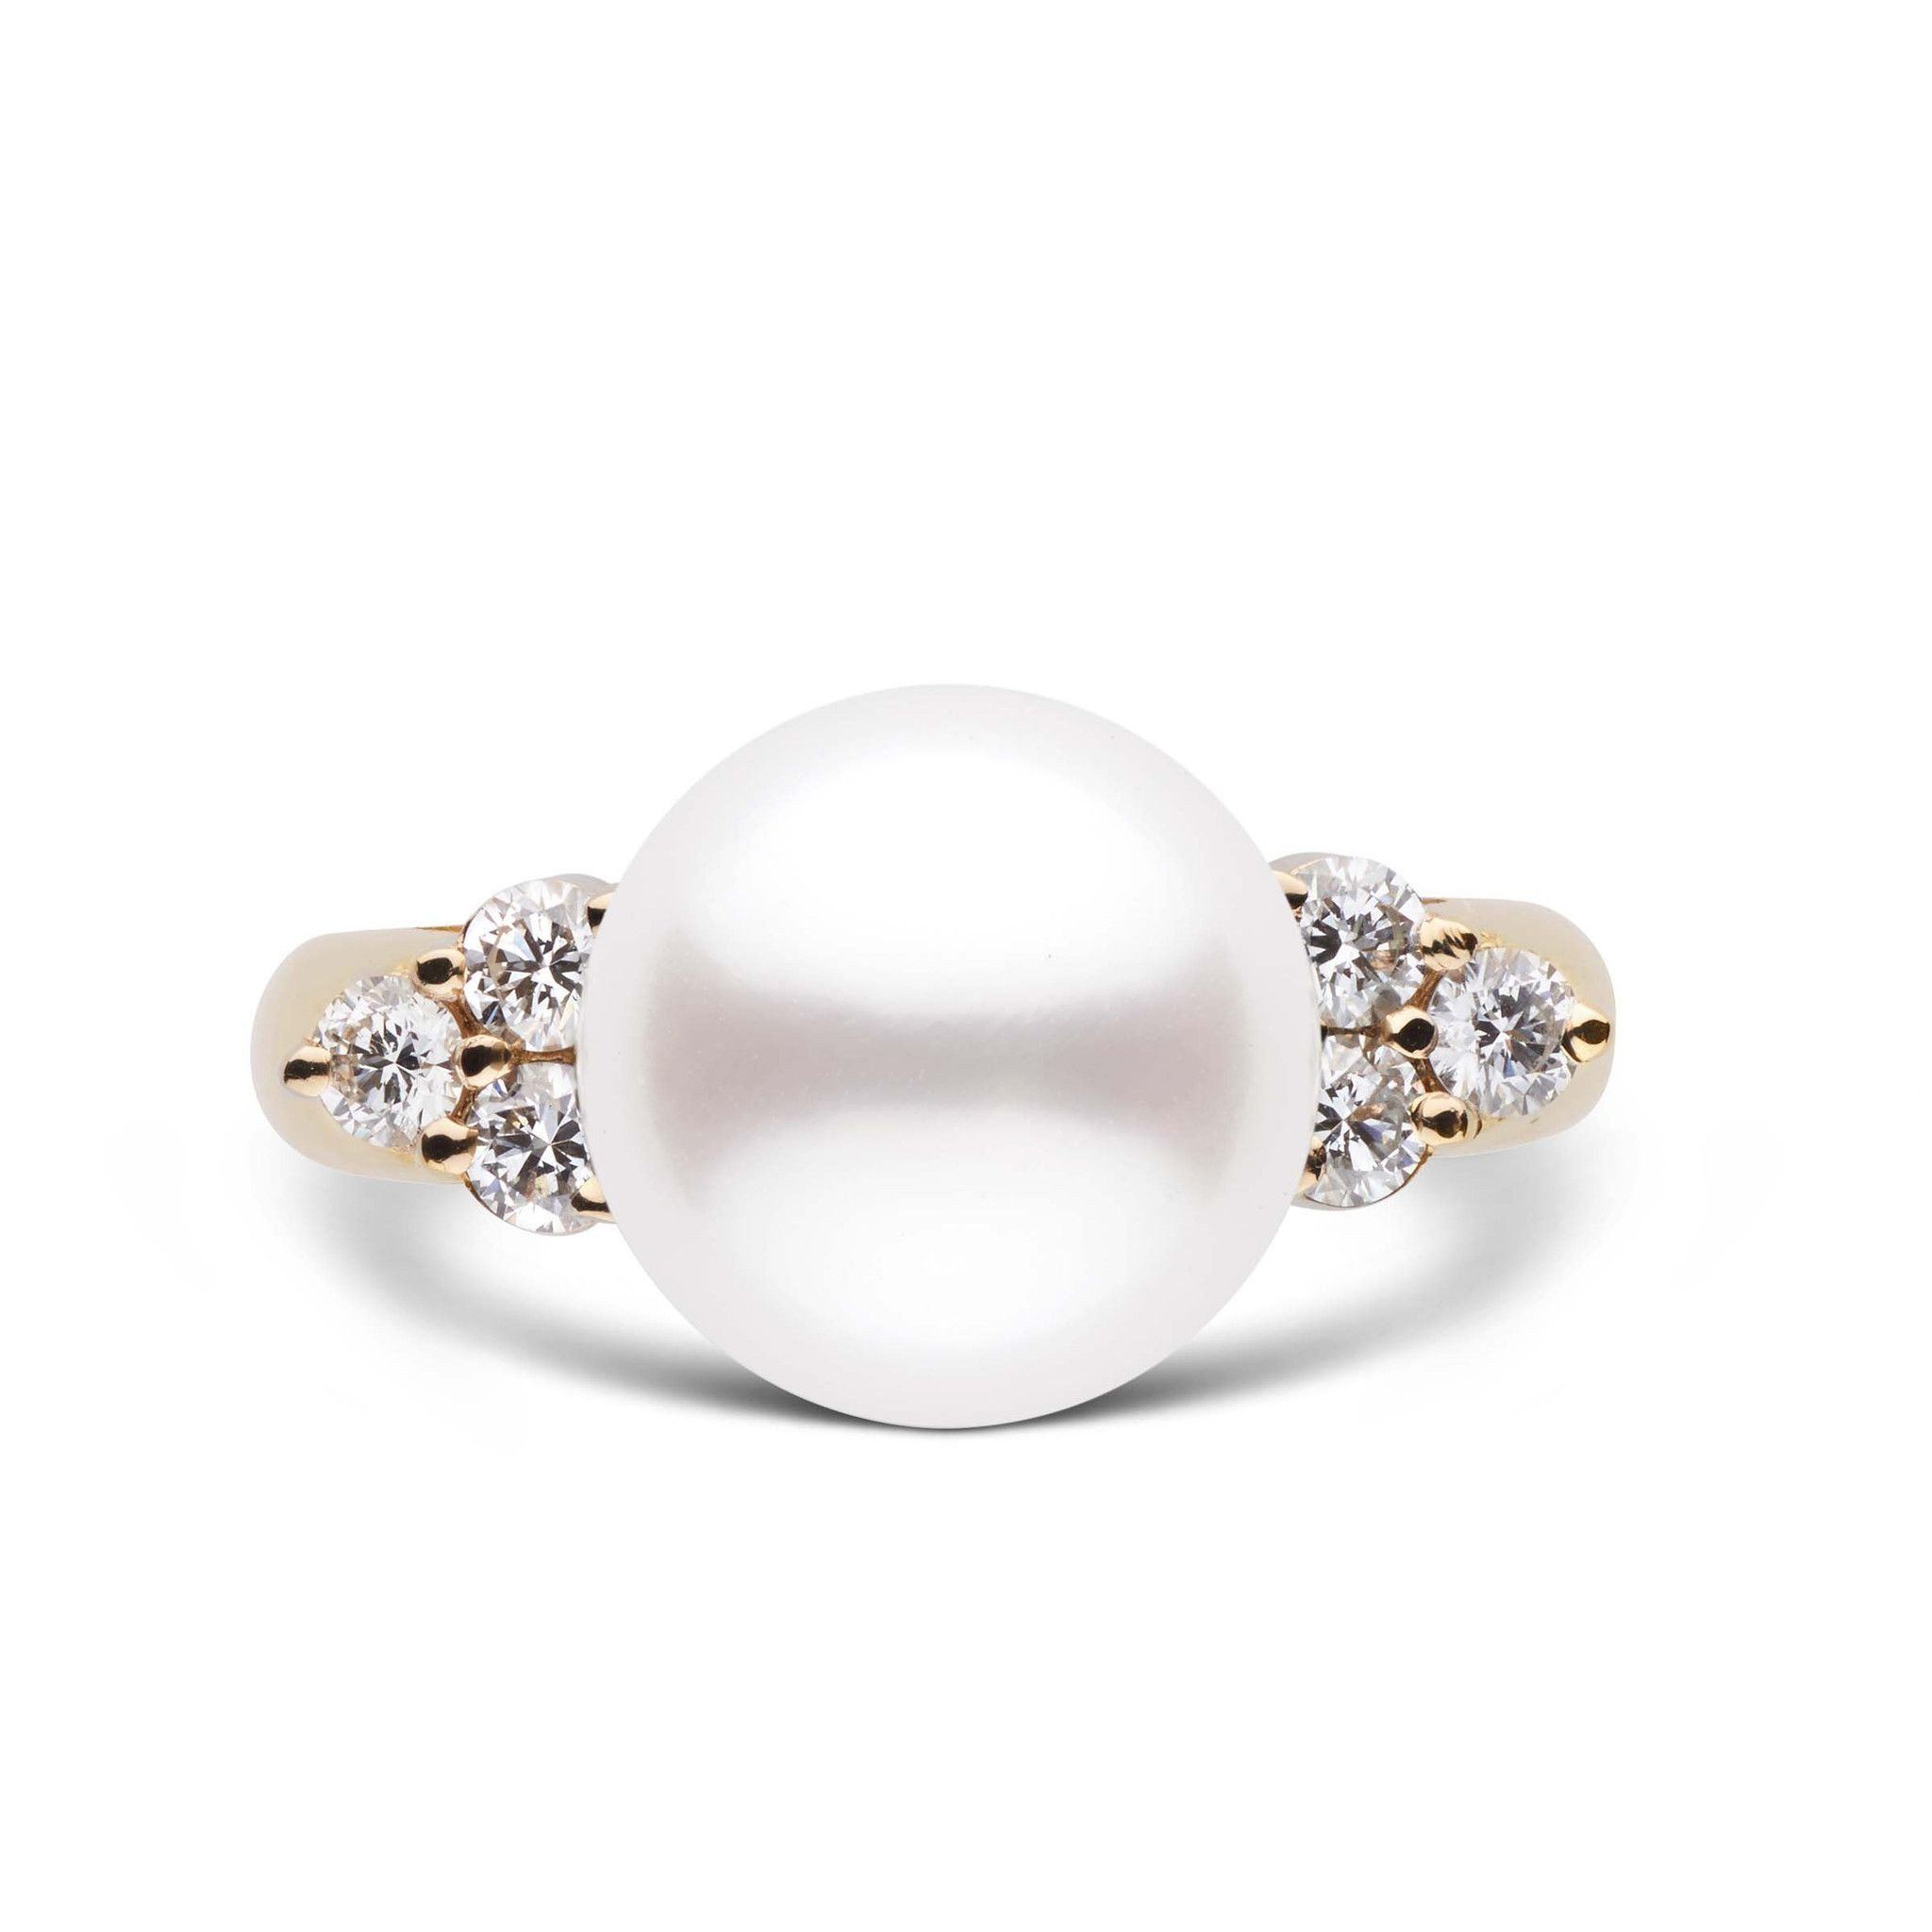 Always Collection 10.0-11.0 mm White South Sea Pearl Ring